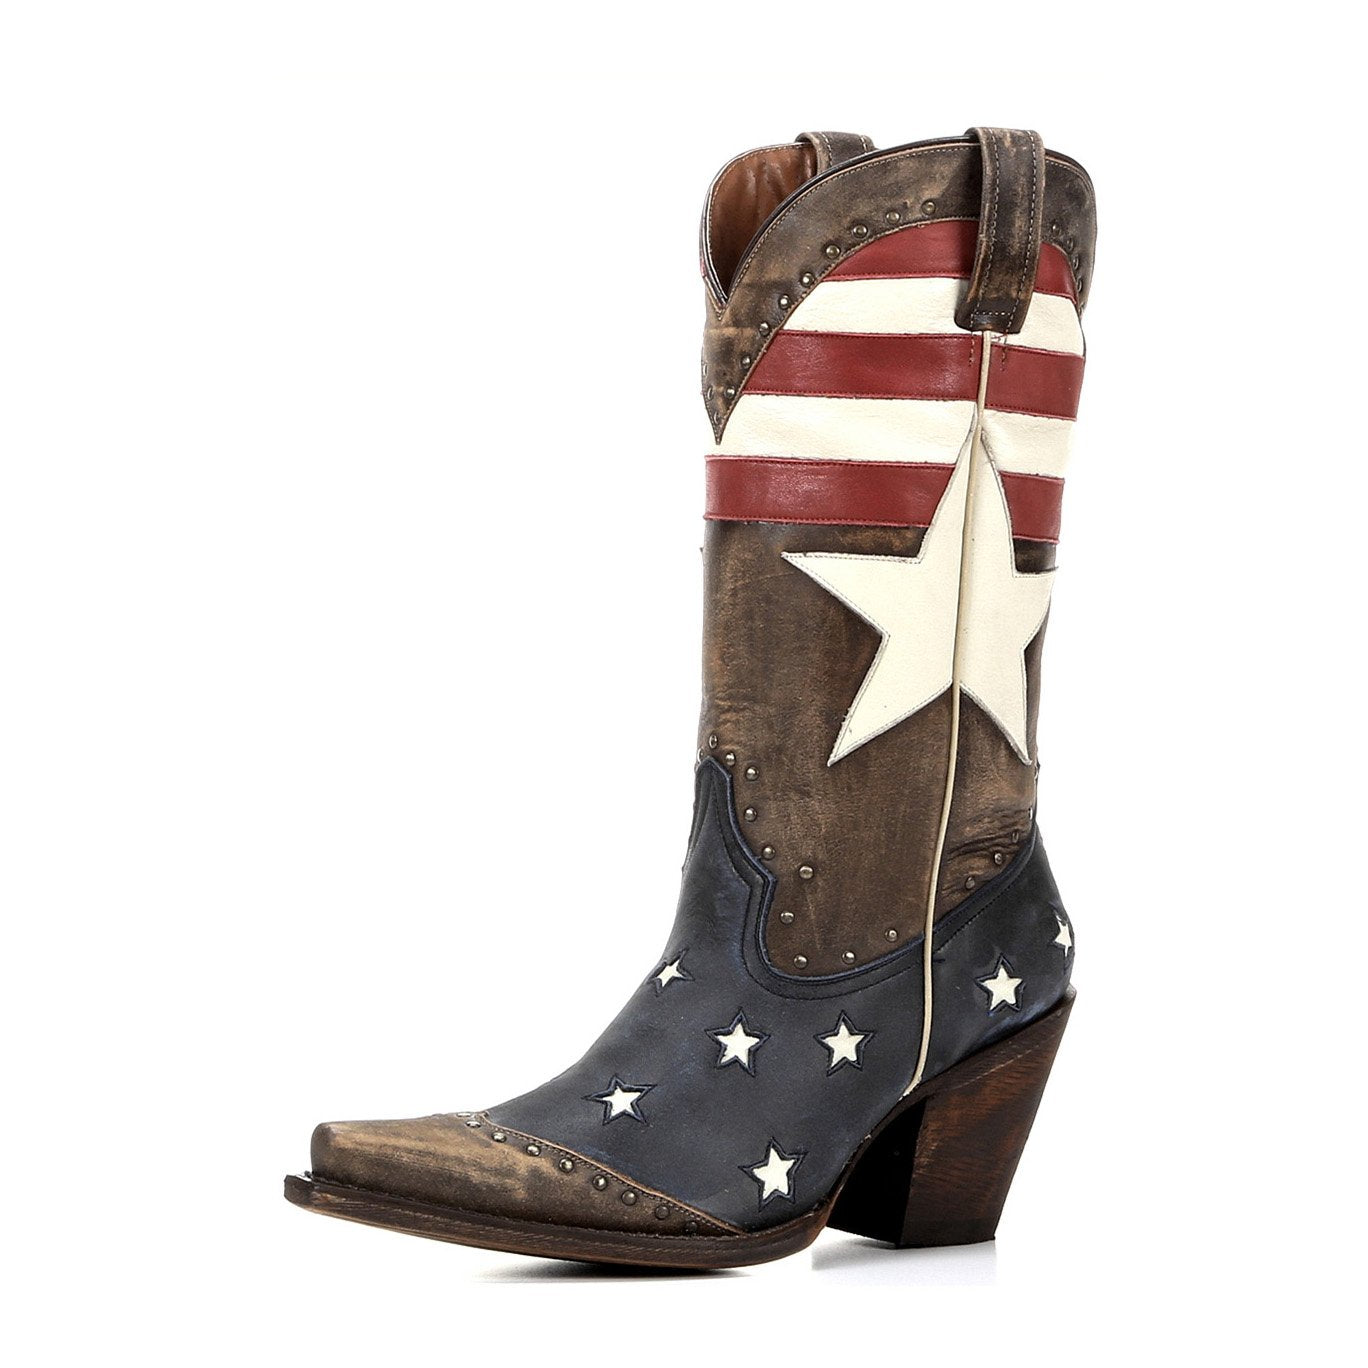 Redneck Riviera Women's Freedom Boot - Vintage Cinnamon - French's Boots